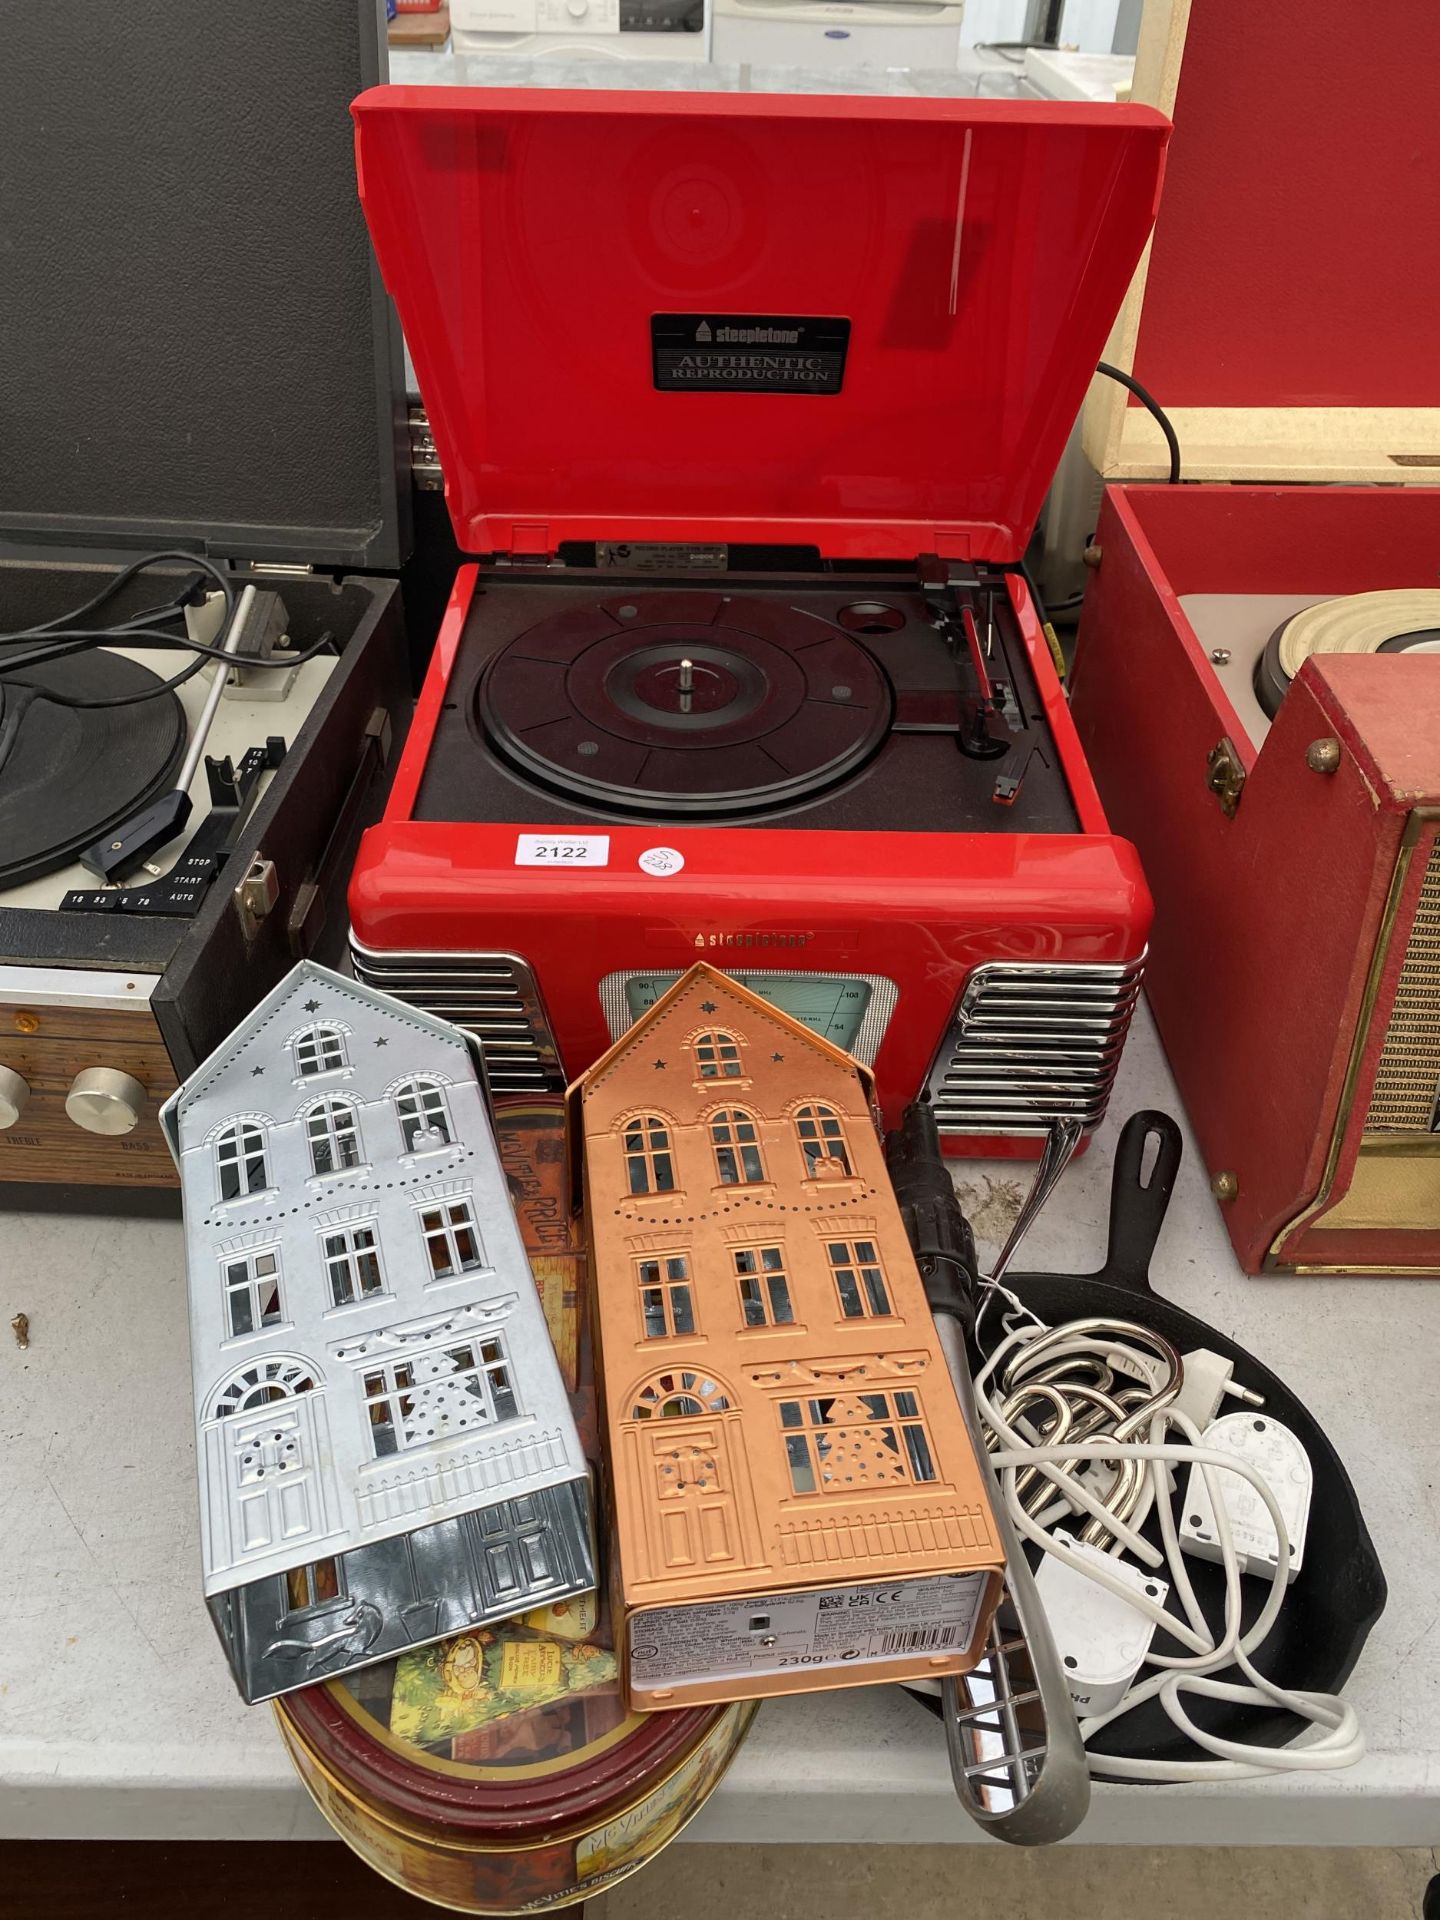 A STEEPLETONE PORTABLE RECORD PLAYER AND AN ASSORTMENT OF ITEMS